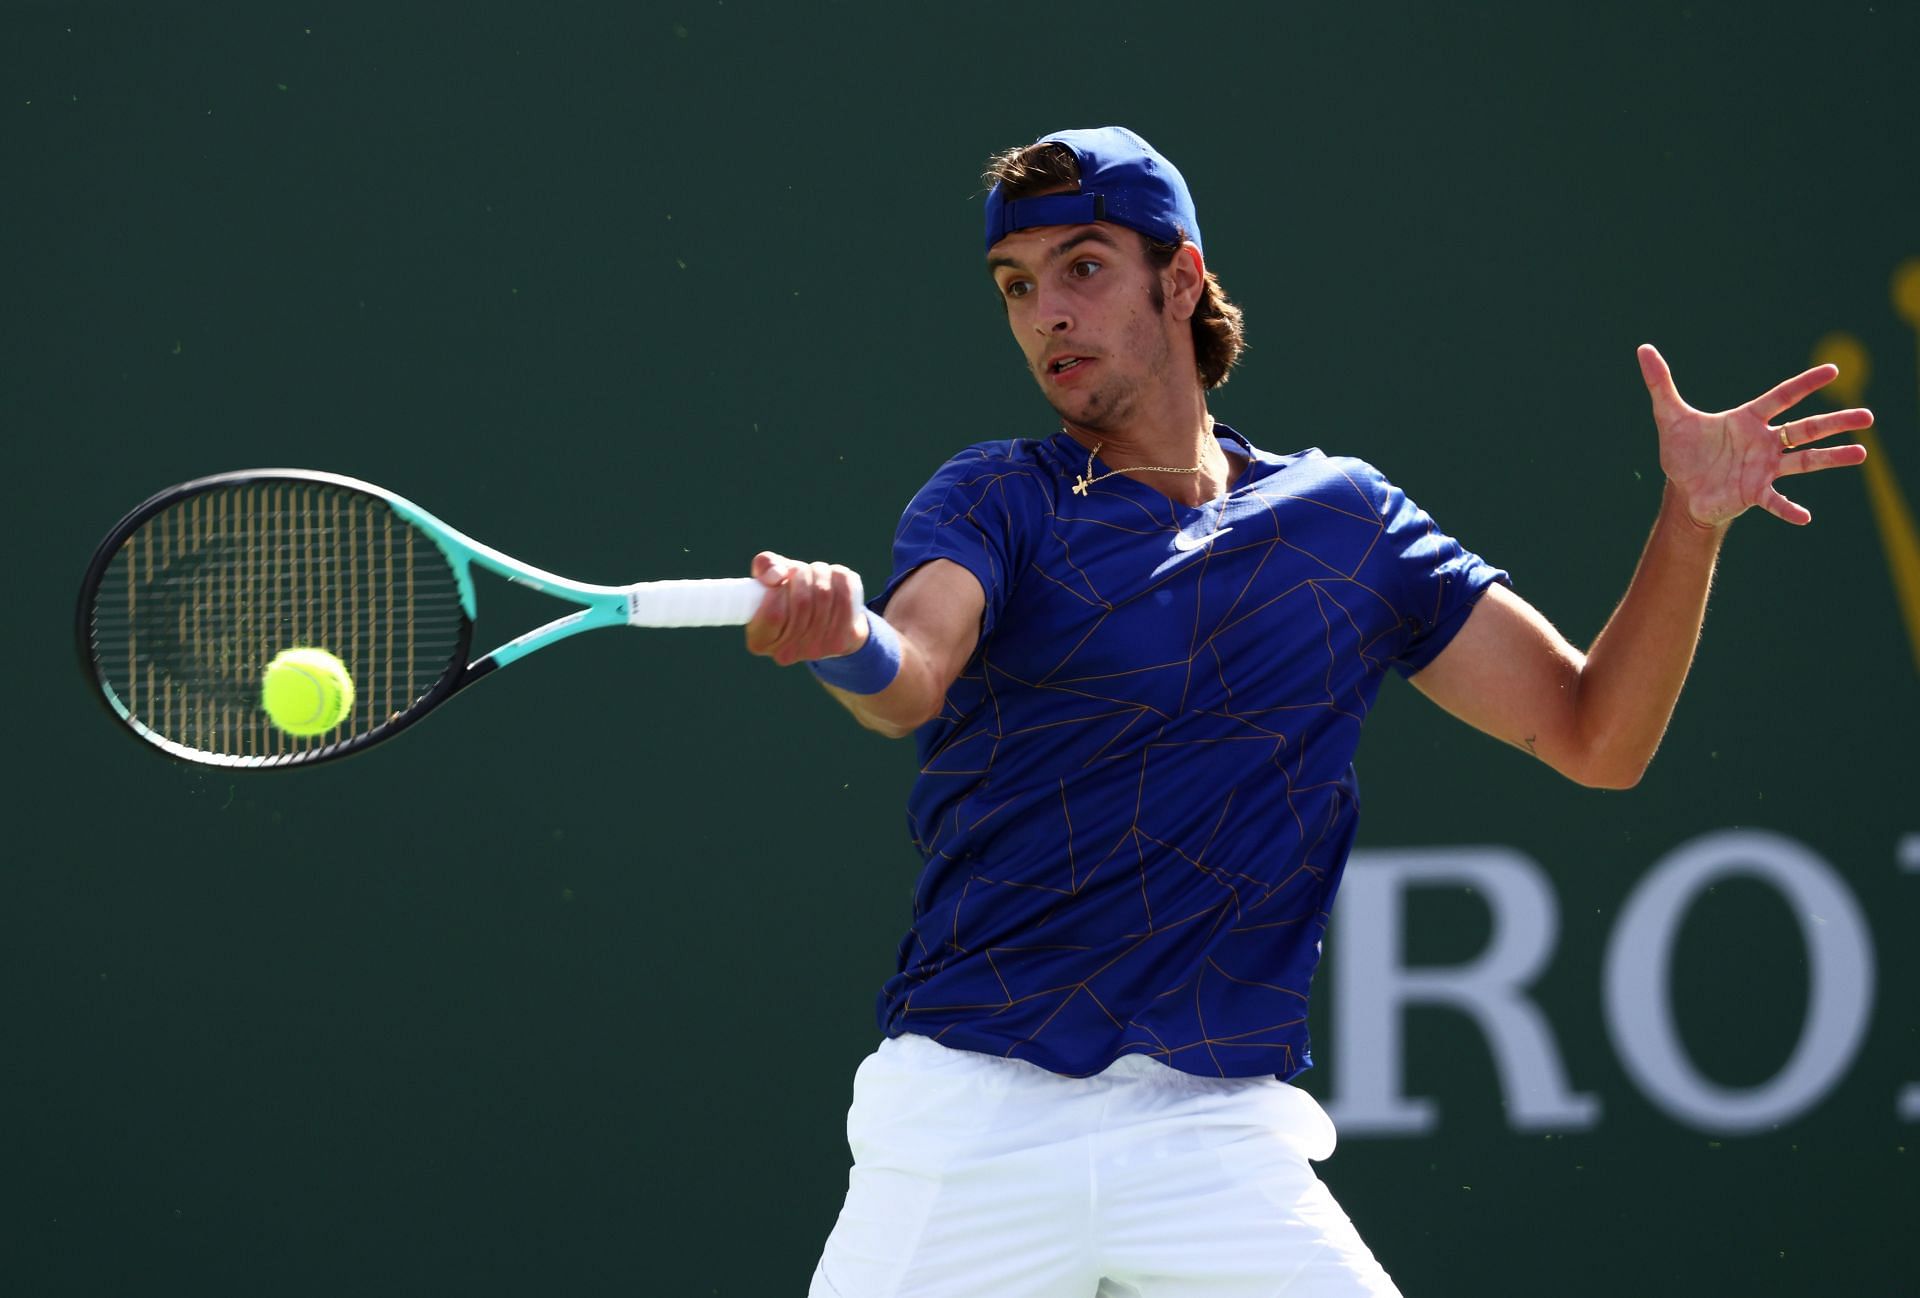 Lorenzo Musetti at the 2022 Indian Wells Open